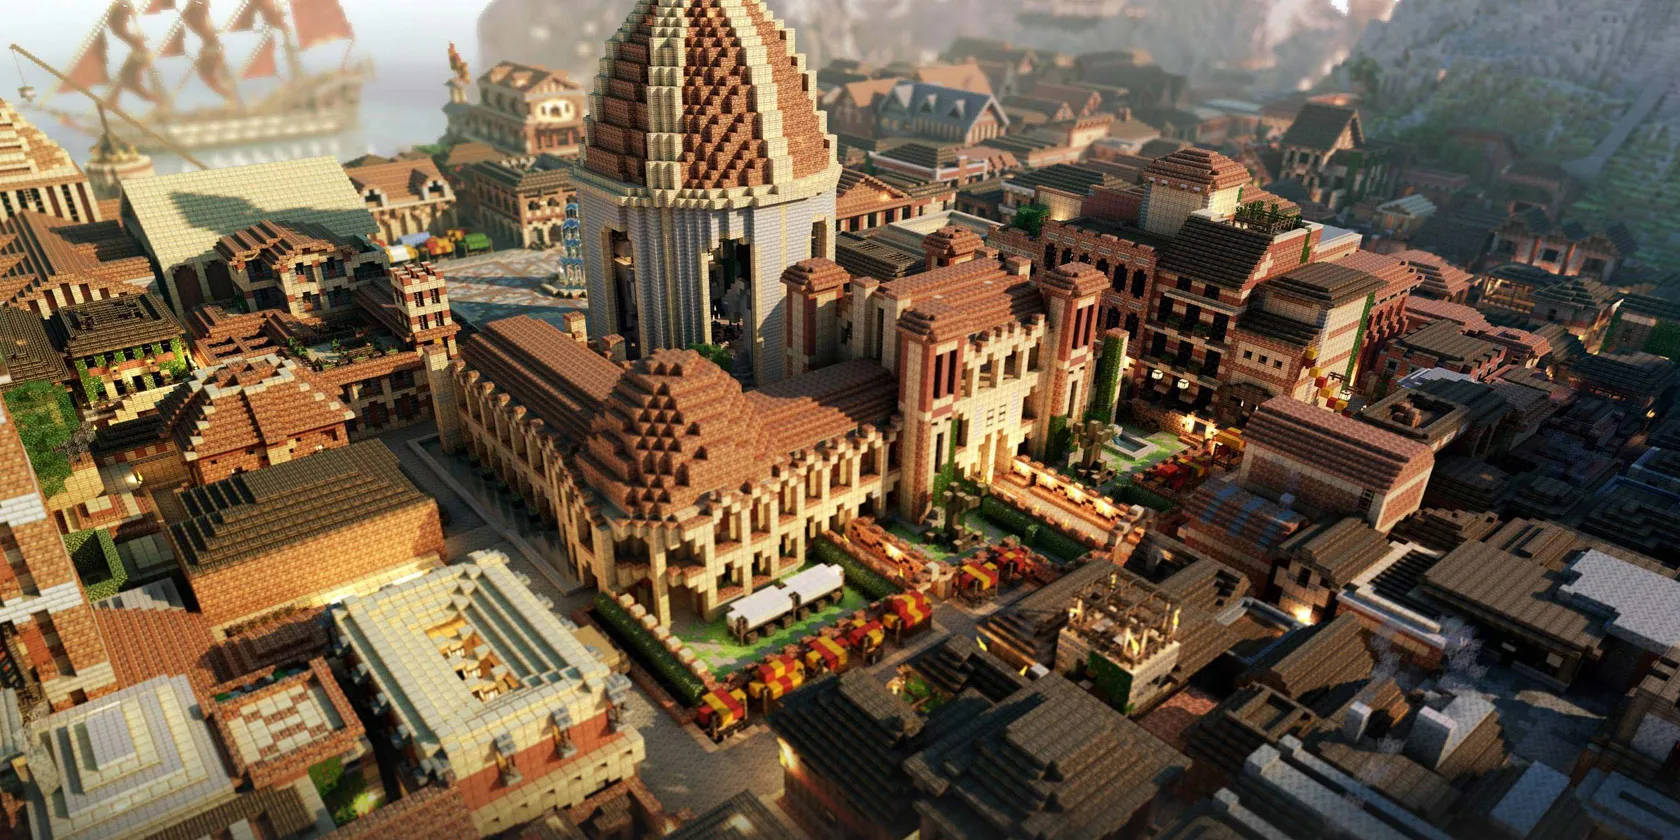 Beautiful Minecraft Old European Town Picture